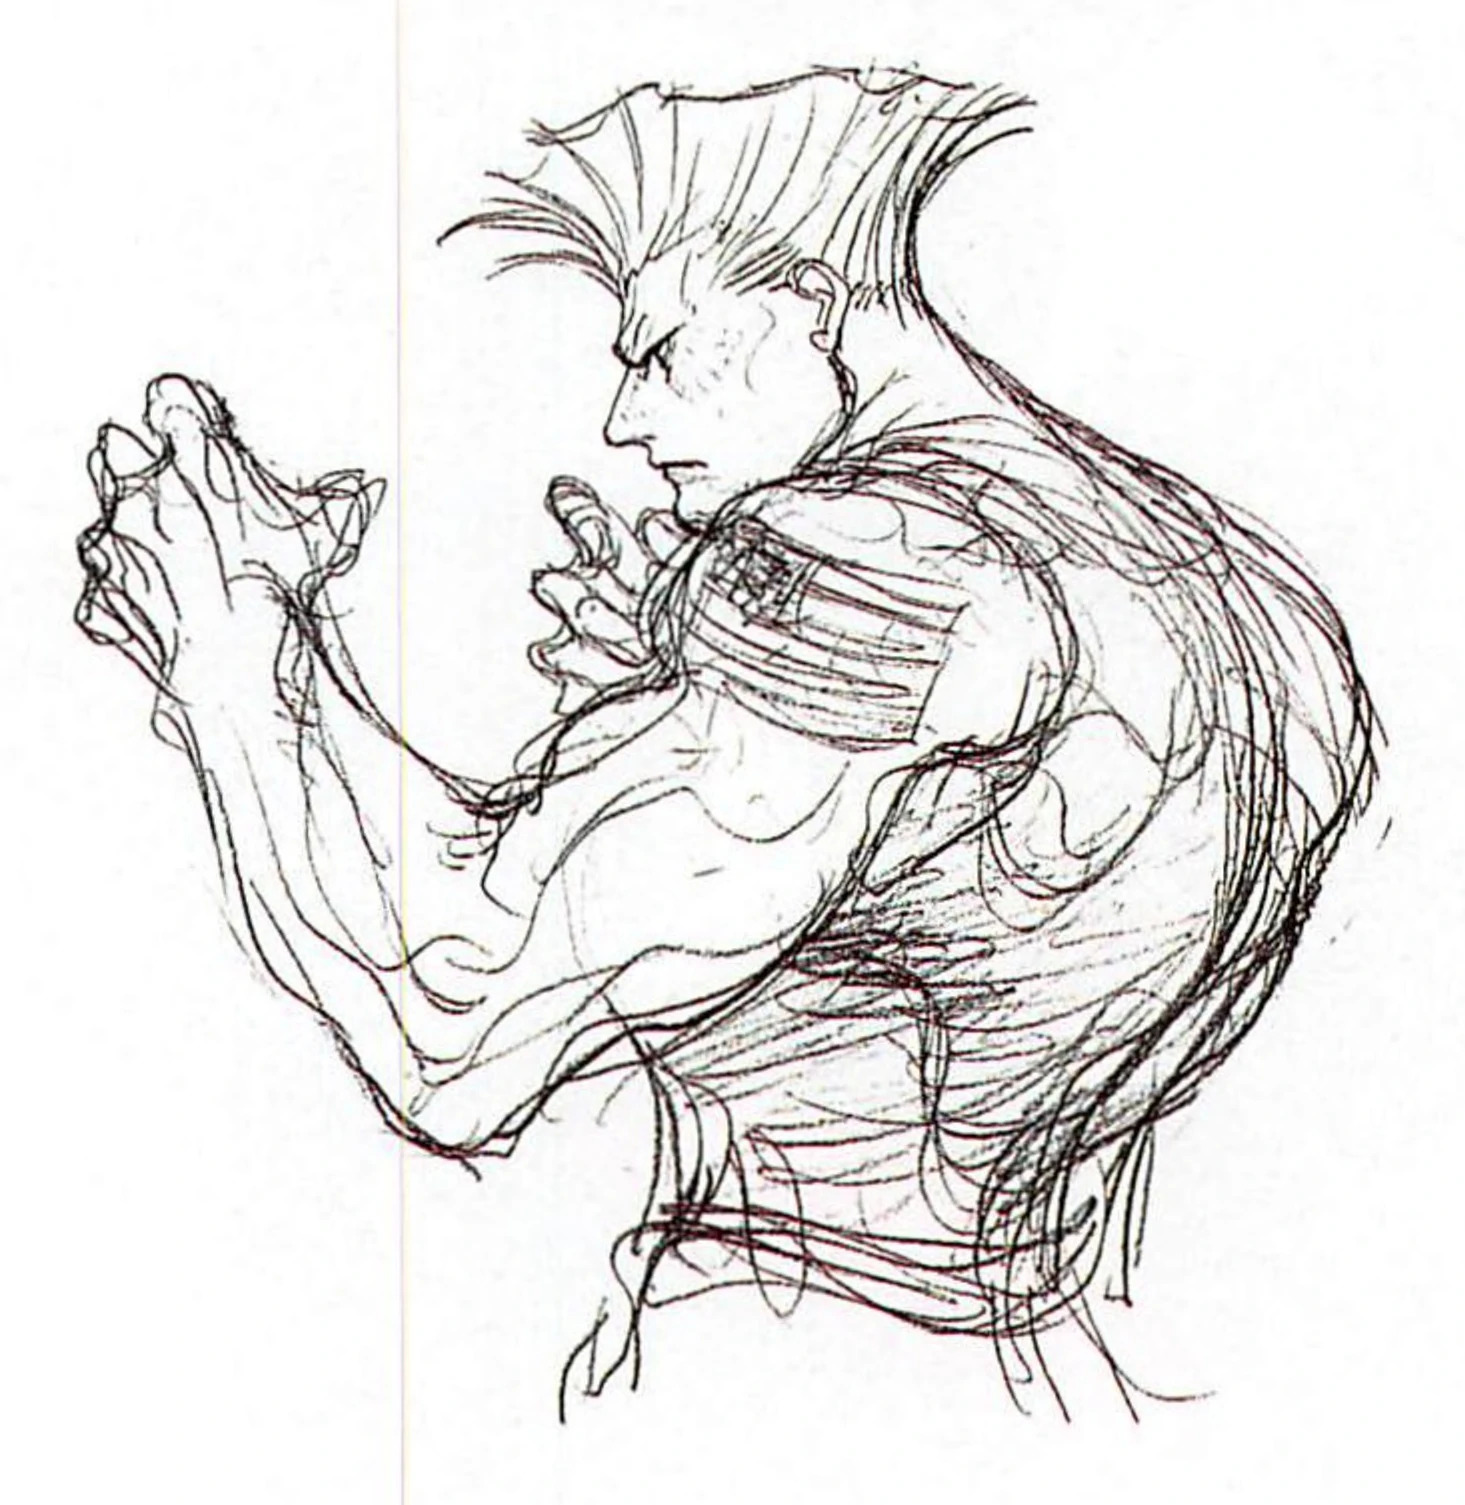 Super Street Fighter 2 Turbo - Character Sketches (by Kinu Nishimura) .